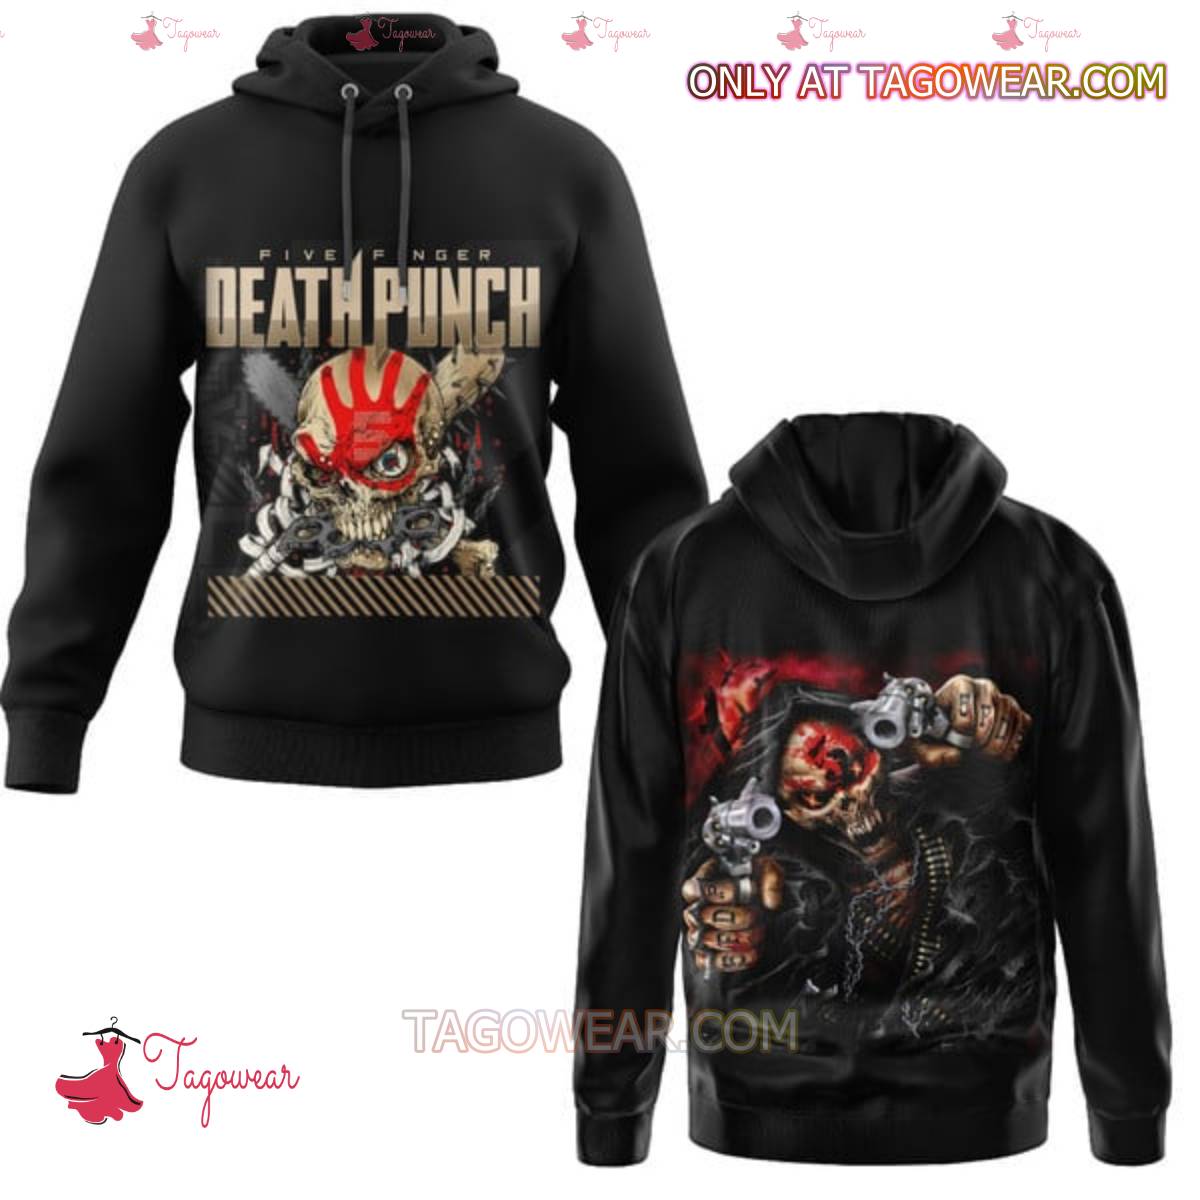 Five Finger Death Punch Skull With Guns T-shirt, Hoodie